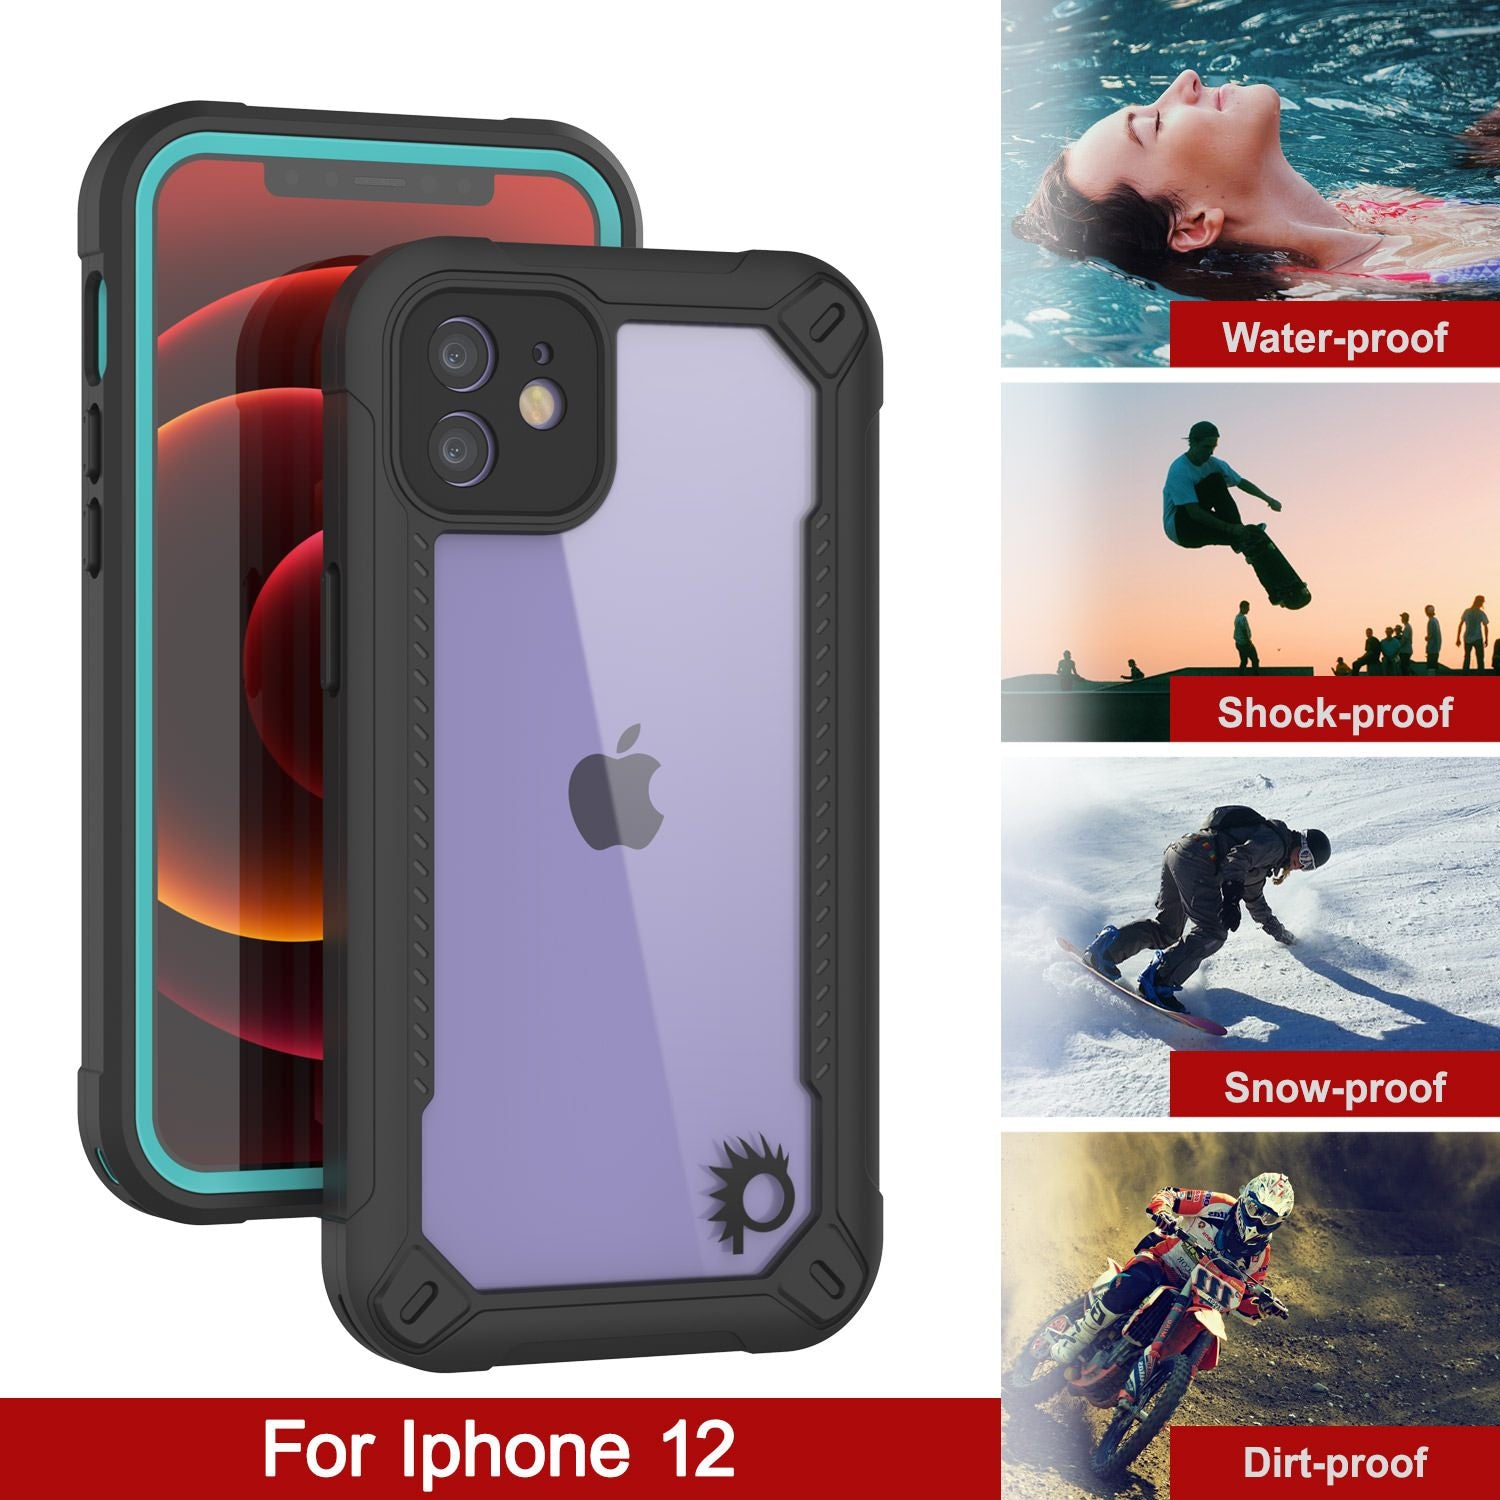 iPhone 12 Waterproof IP68 Case, Punkcase [teal]  [Maximus Series] [Slim Fit] [IP68 Certified] [Shockresistant] Clear Armor Cover with Screen Protector | Ultimate Protection